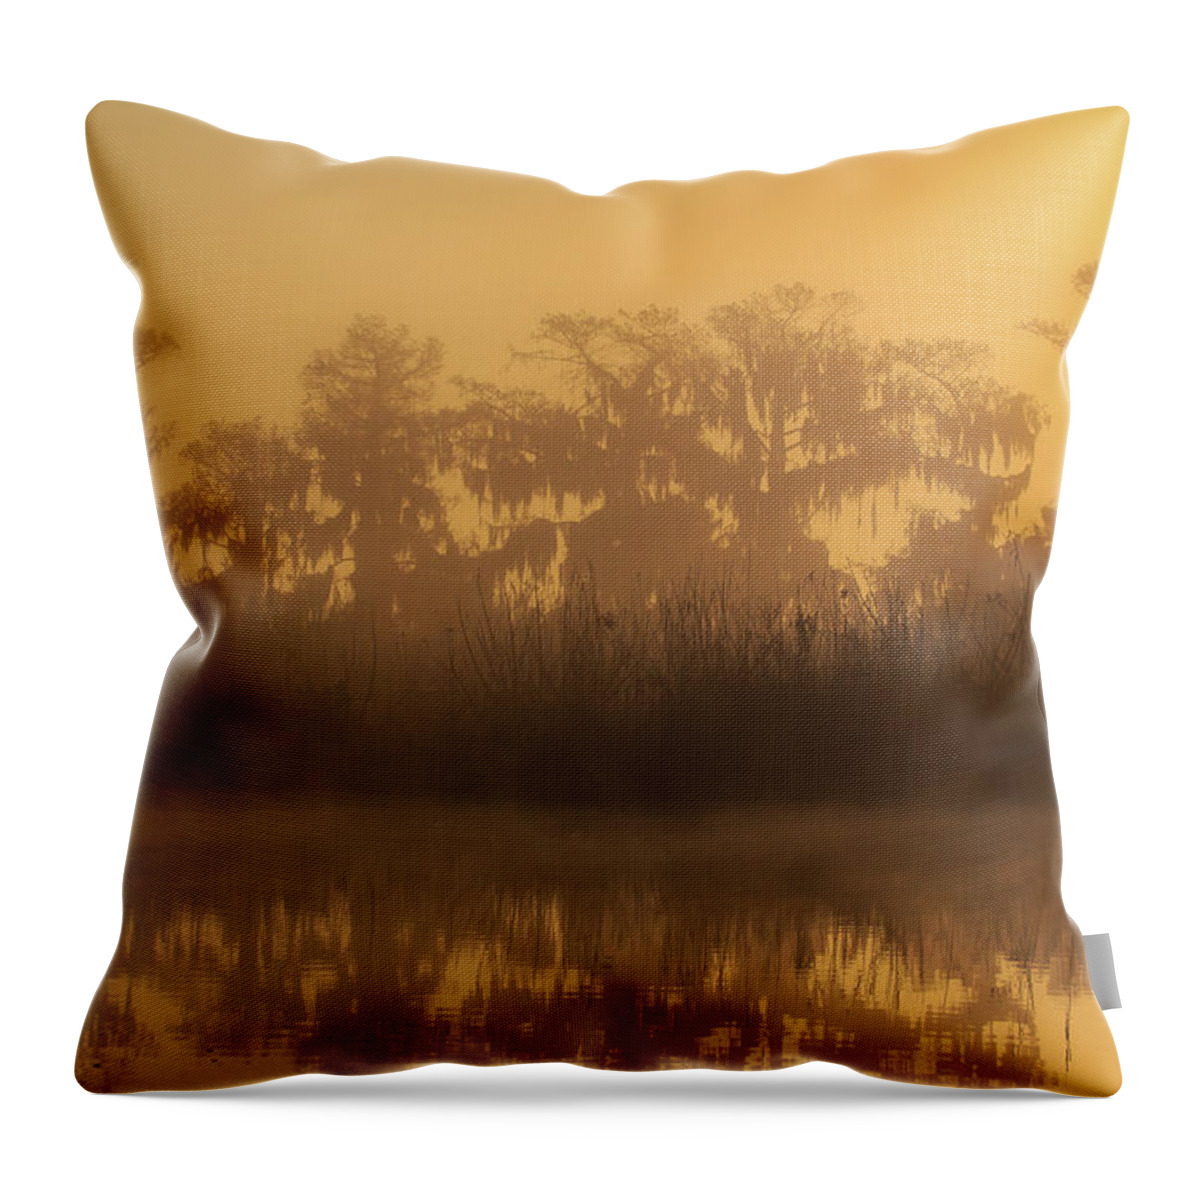 Florida Throw Pillow featuring the photograph Morning Glow by Stefan Mazzola